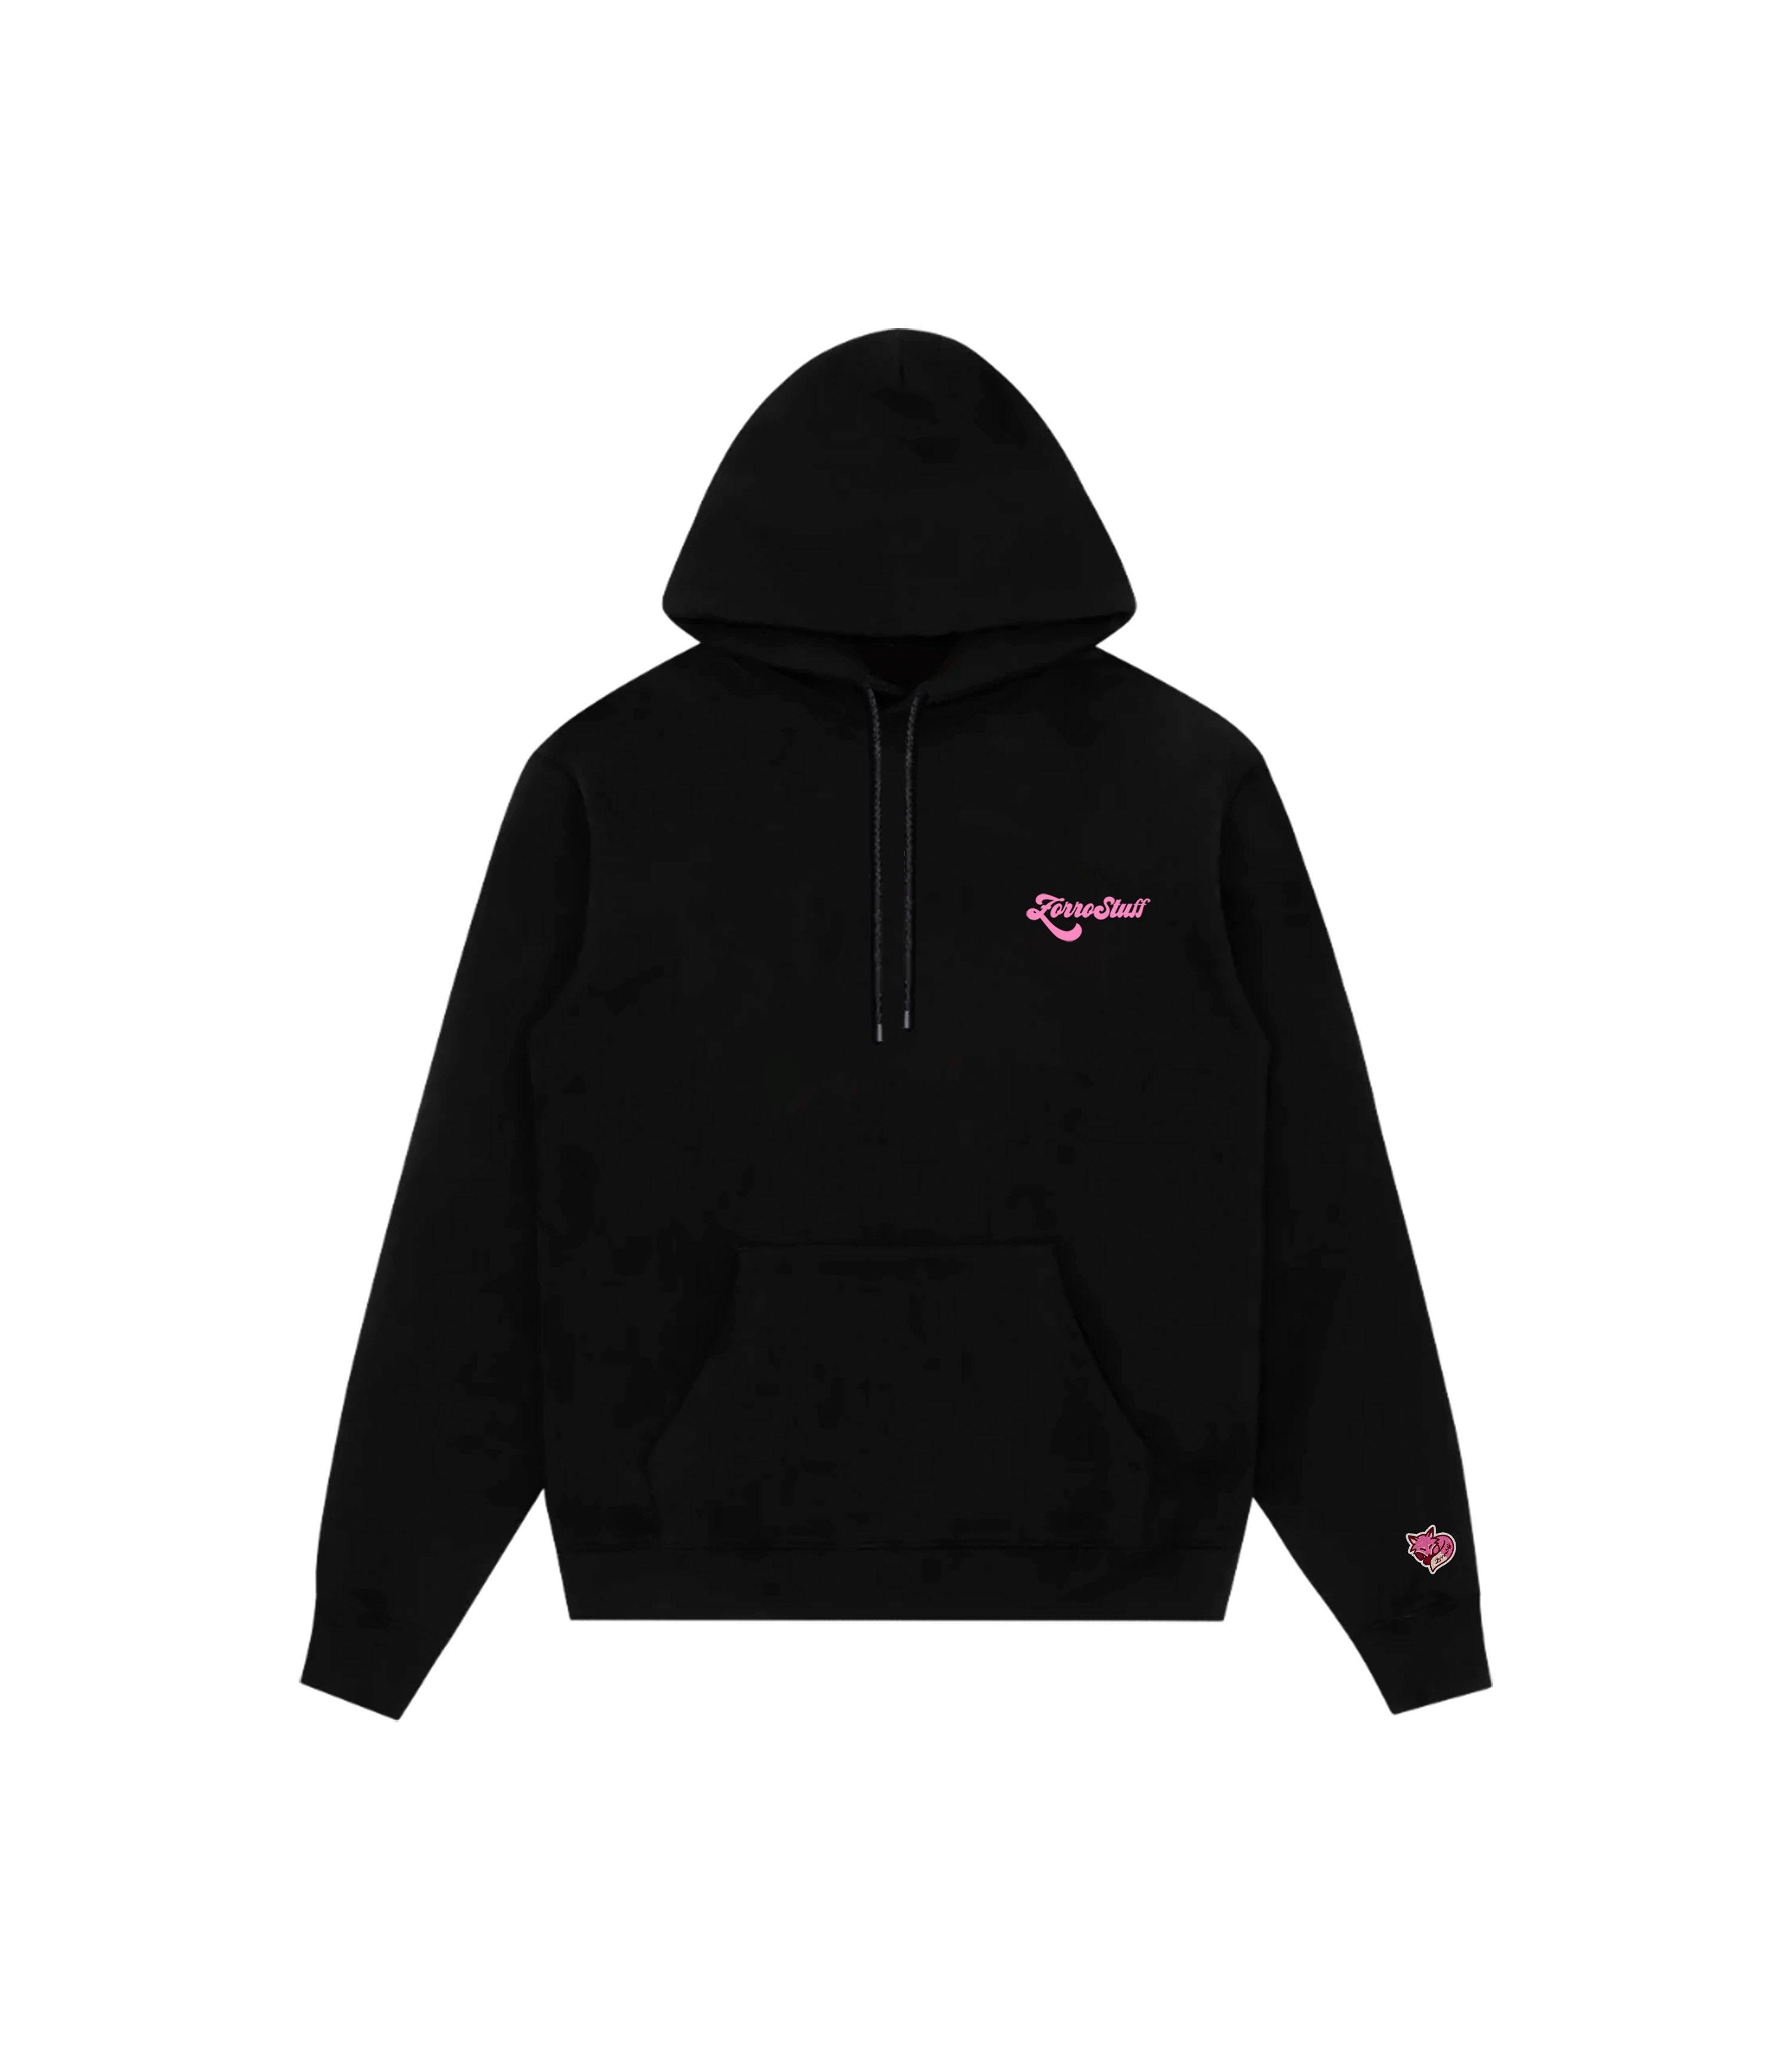 Zorro Stuff Hoodies Fall in love with your dreams Black